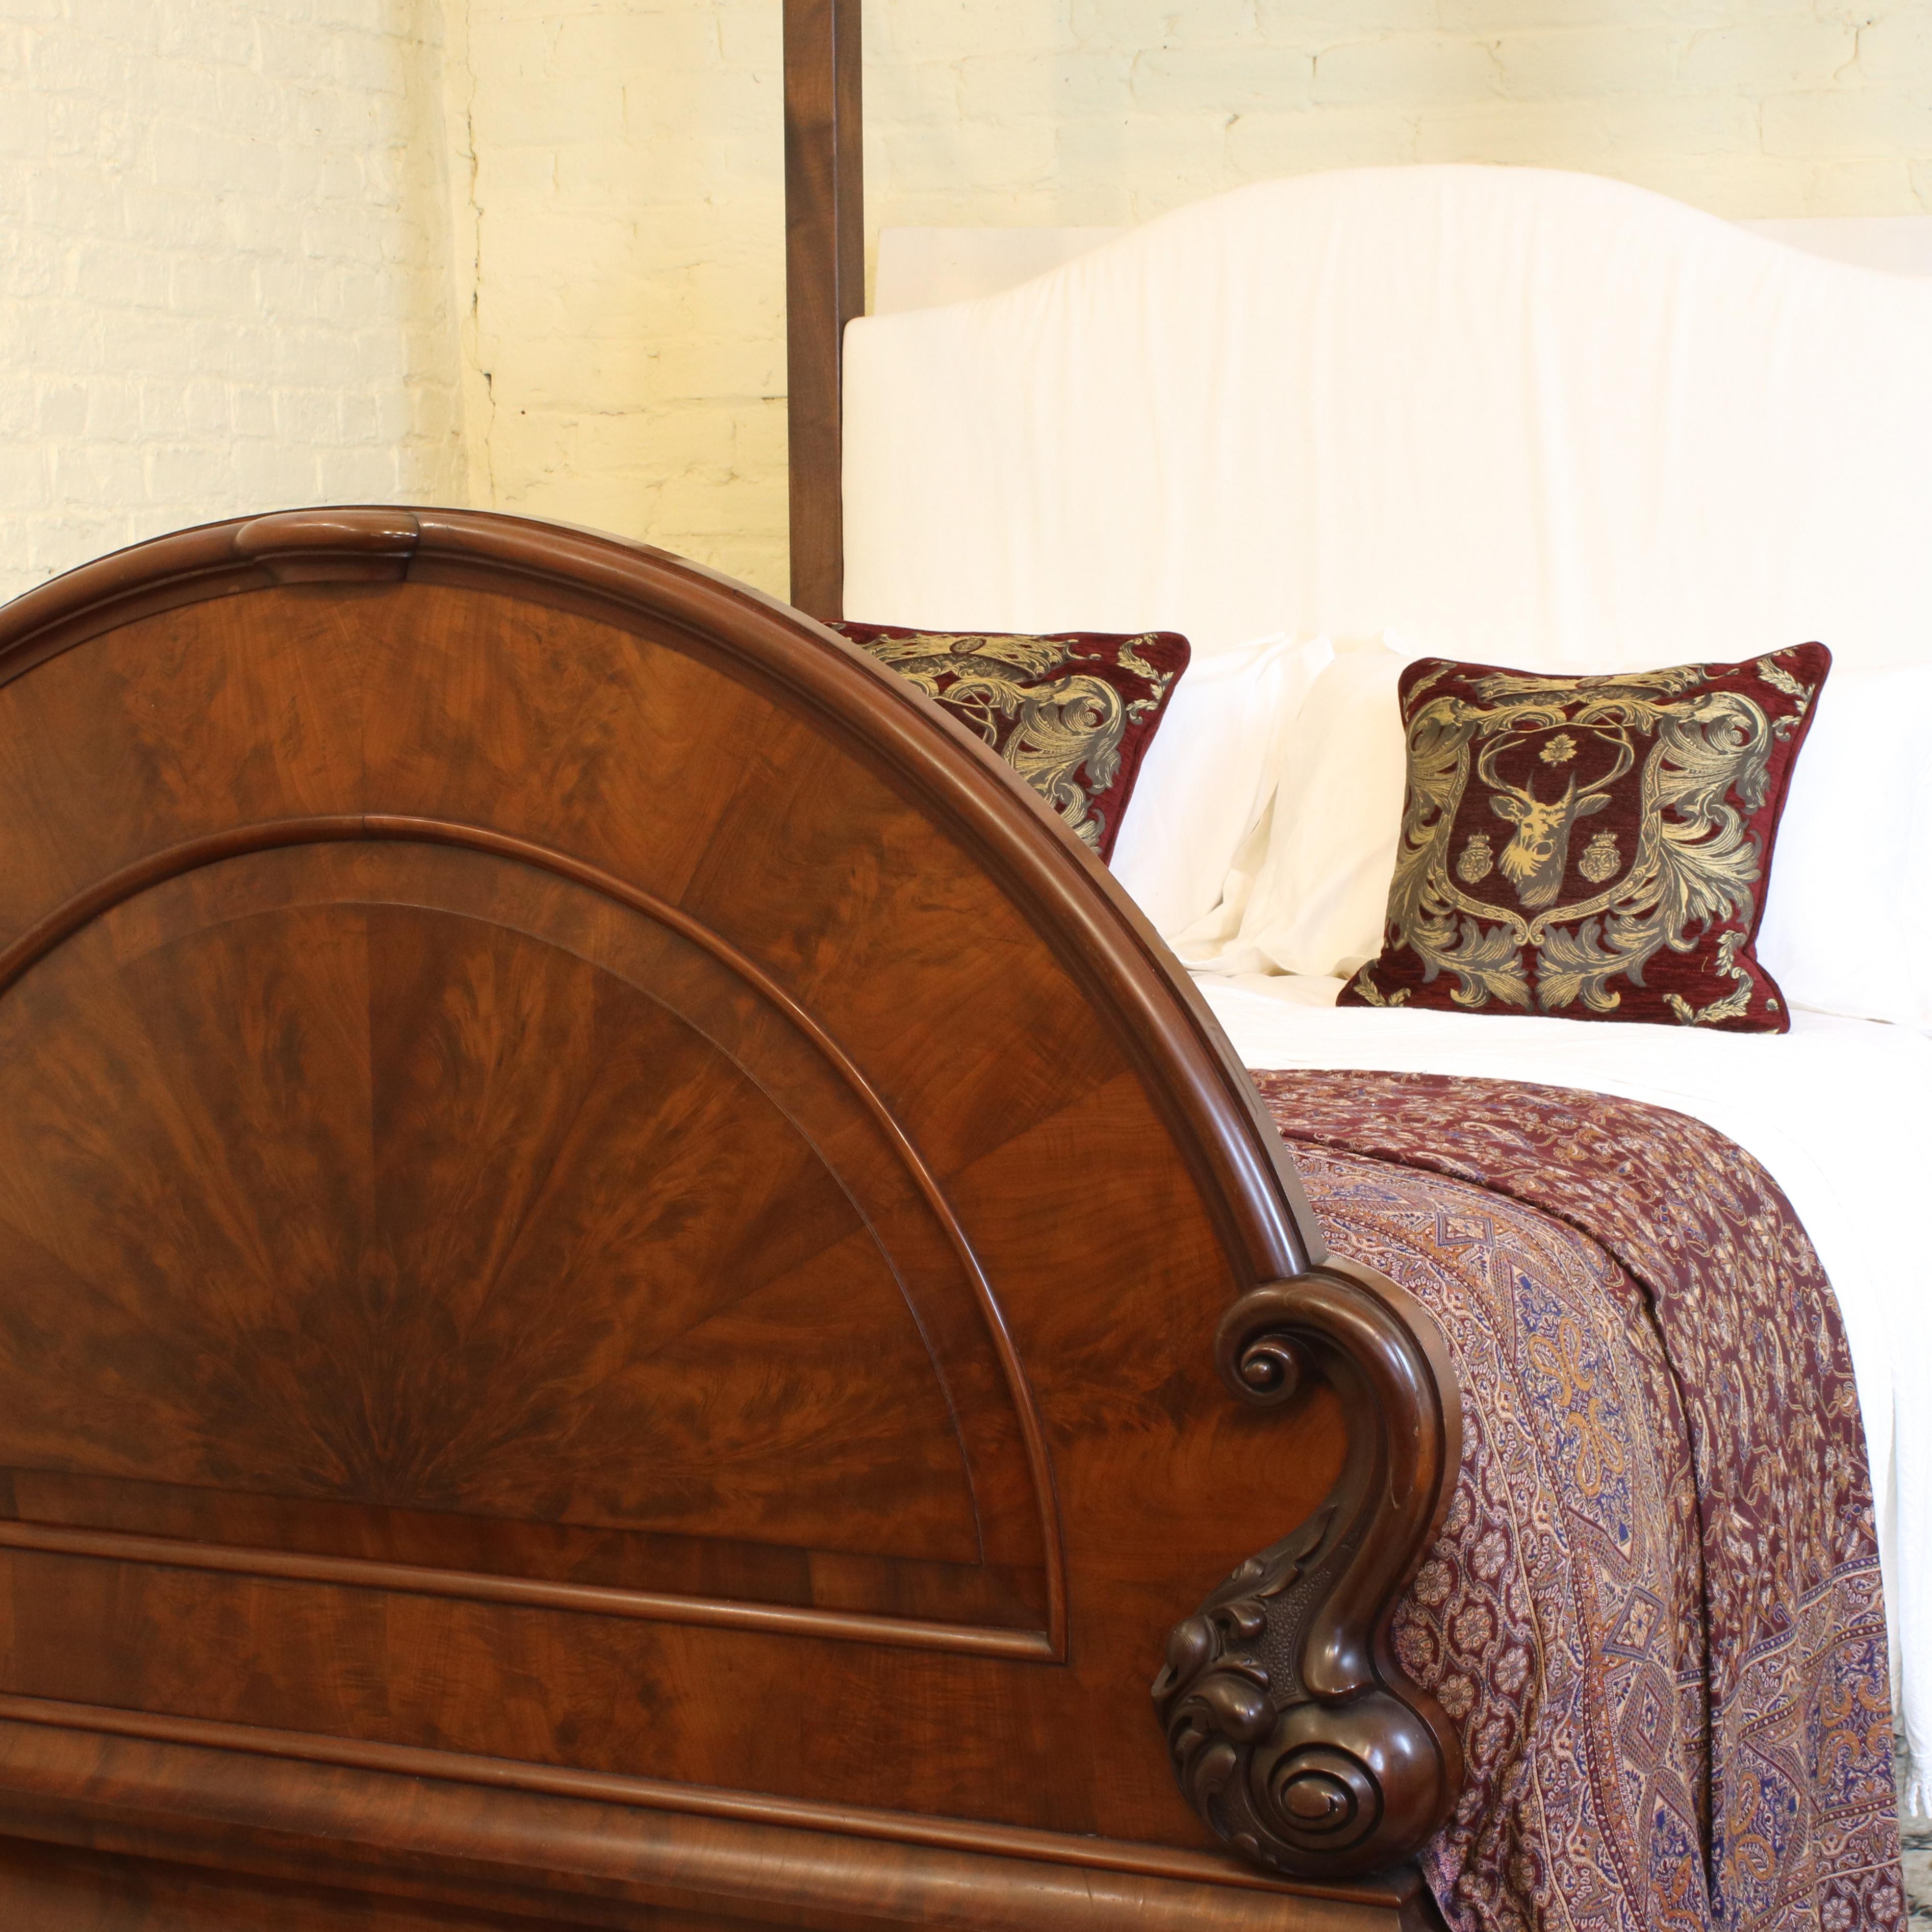 Magnificent mahogany Victorian half tester bed with arched foot panel and serpentine canopy.

The price includes a standard firm bed base to support the mattress. 

The mattress, bedding and bed linen are extra.